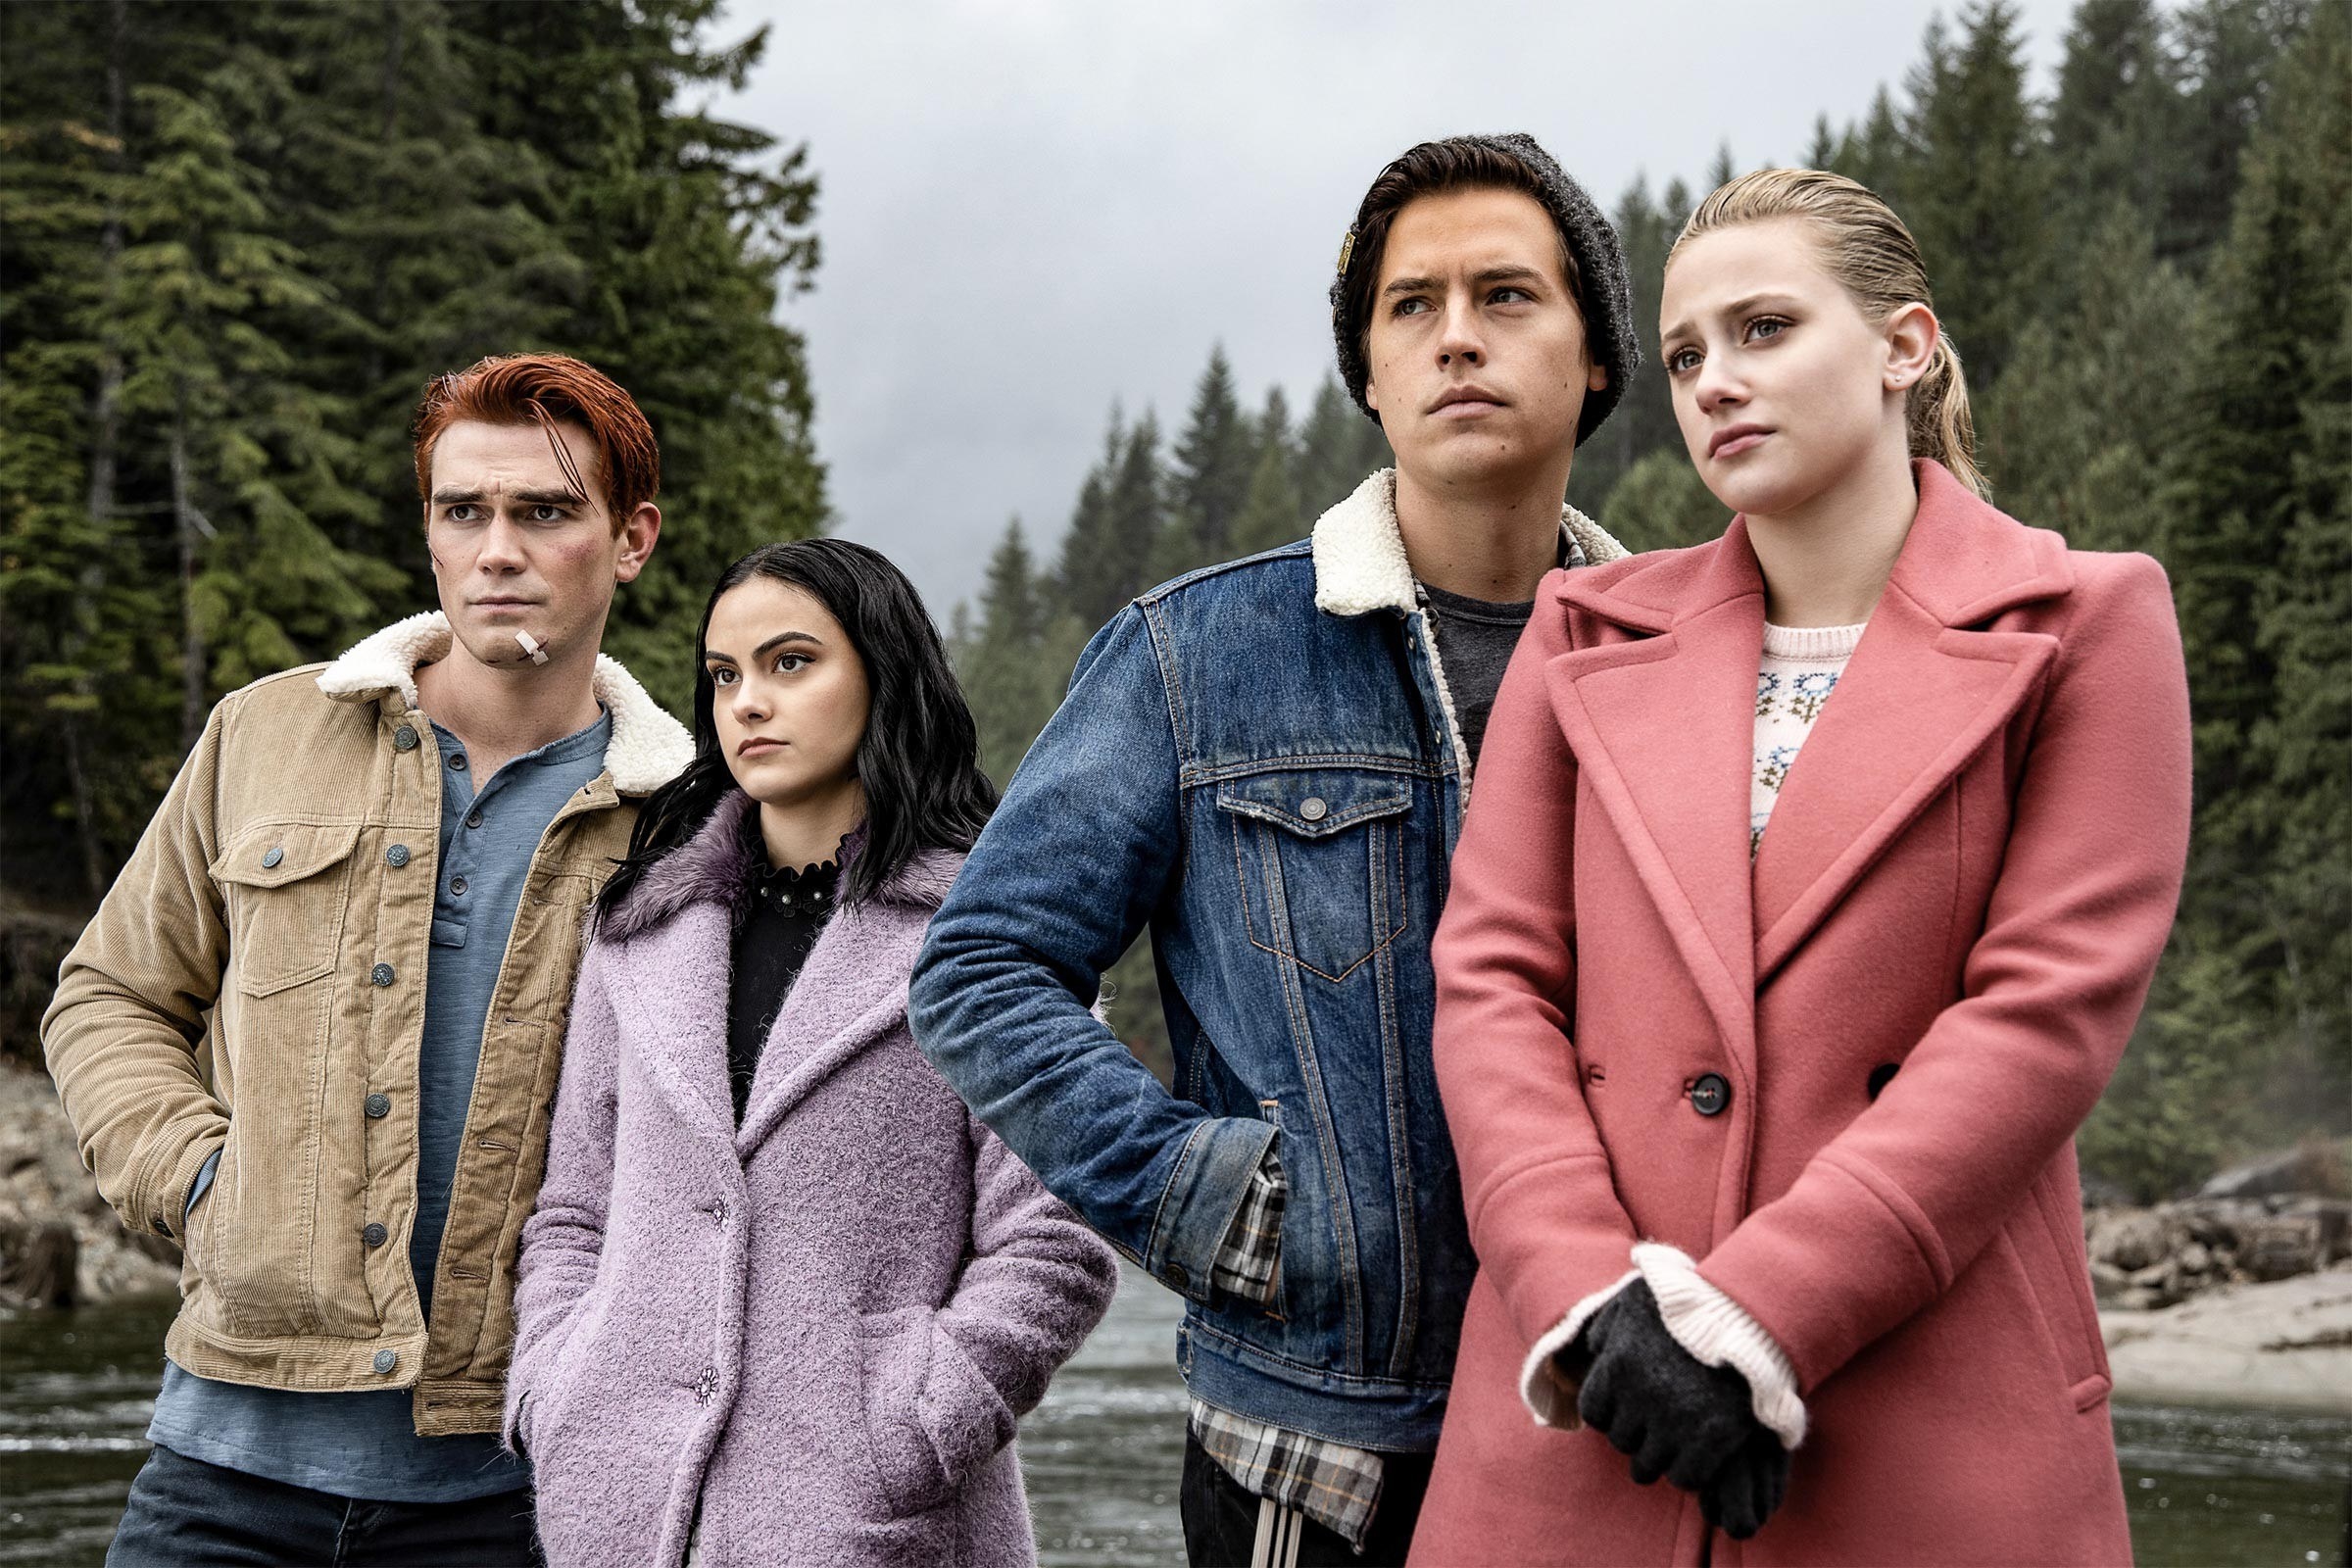 Betty, Jughead, Archie, and Veronica standing together